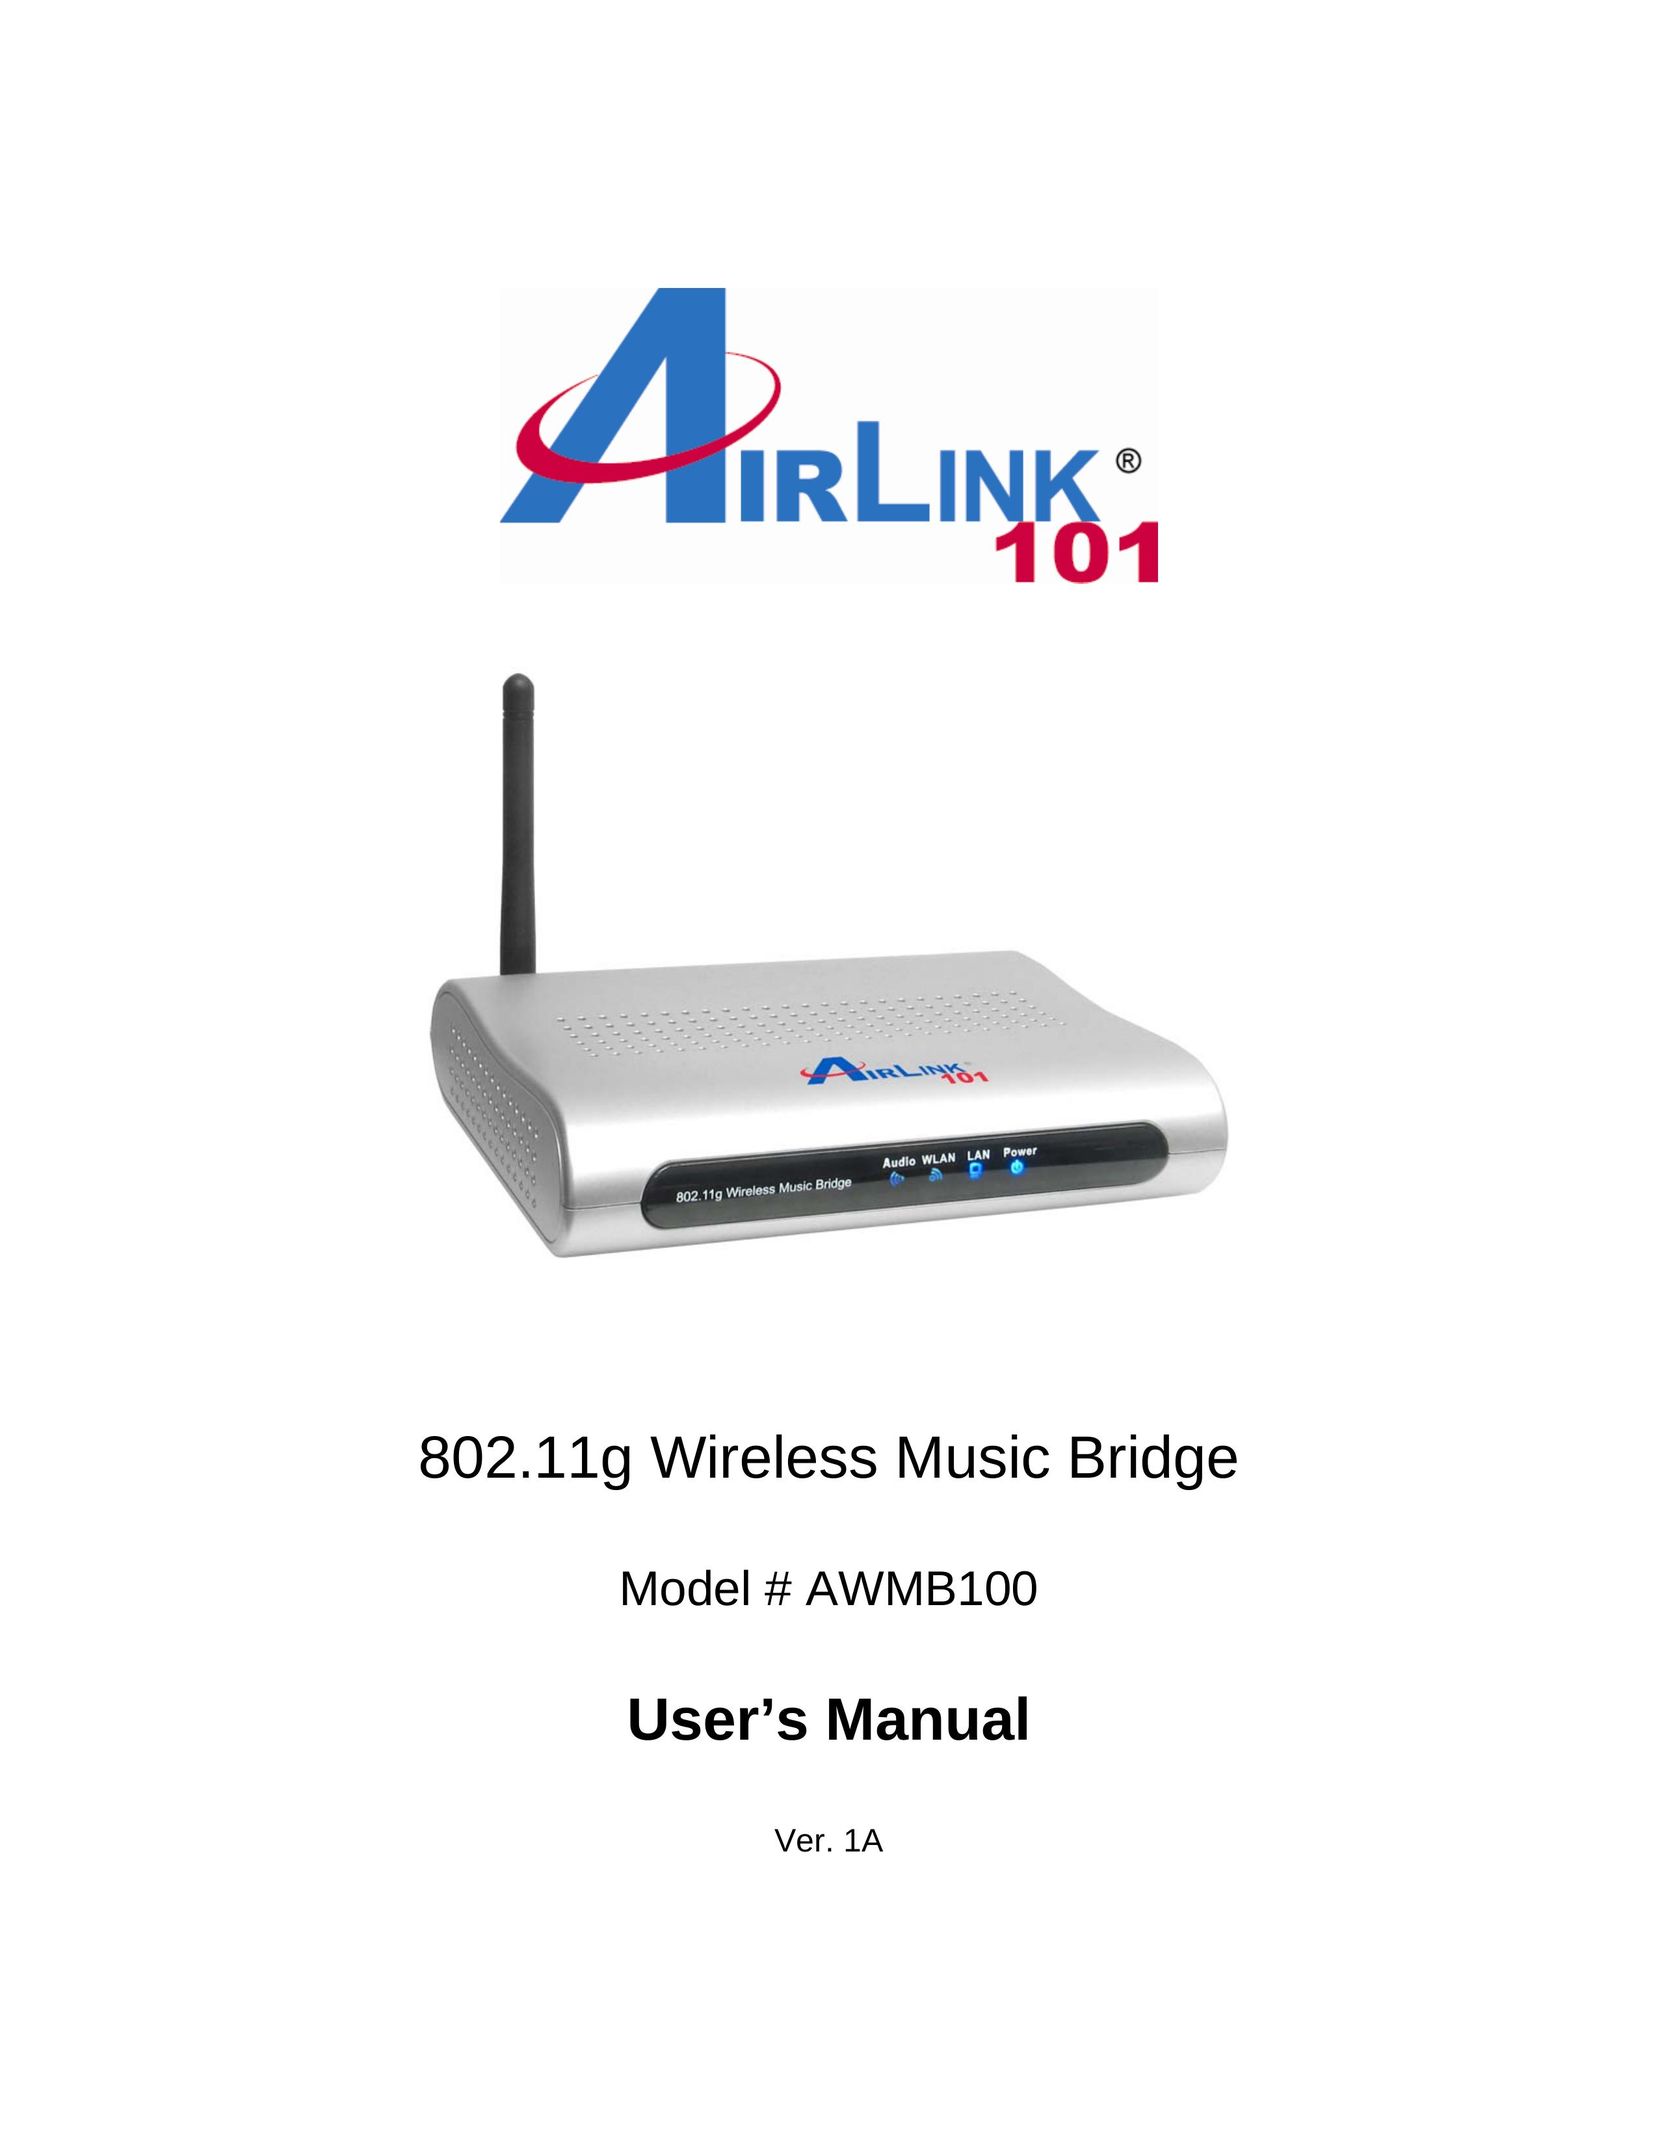 Airlink101 AWMB100 Network Router User Manual